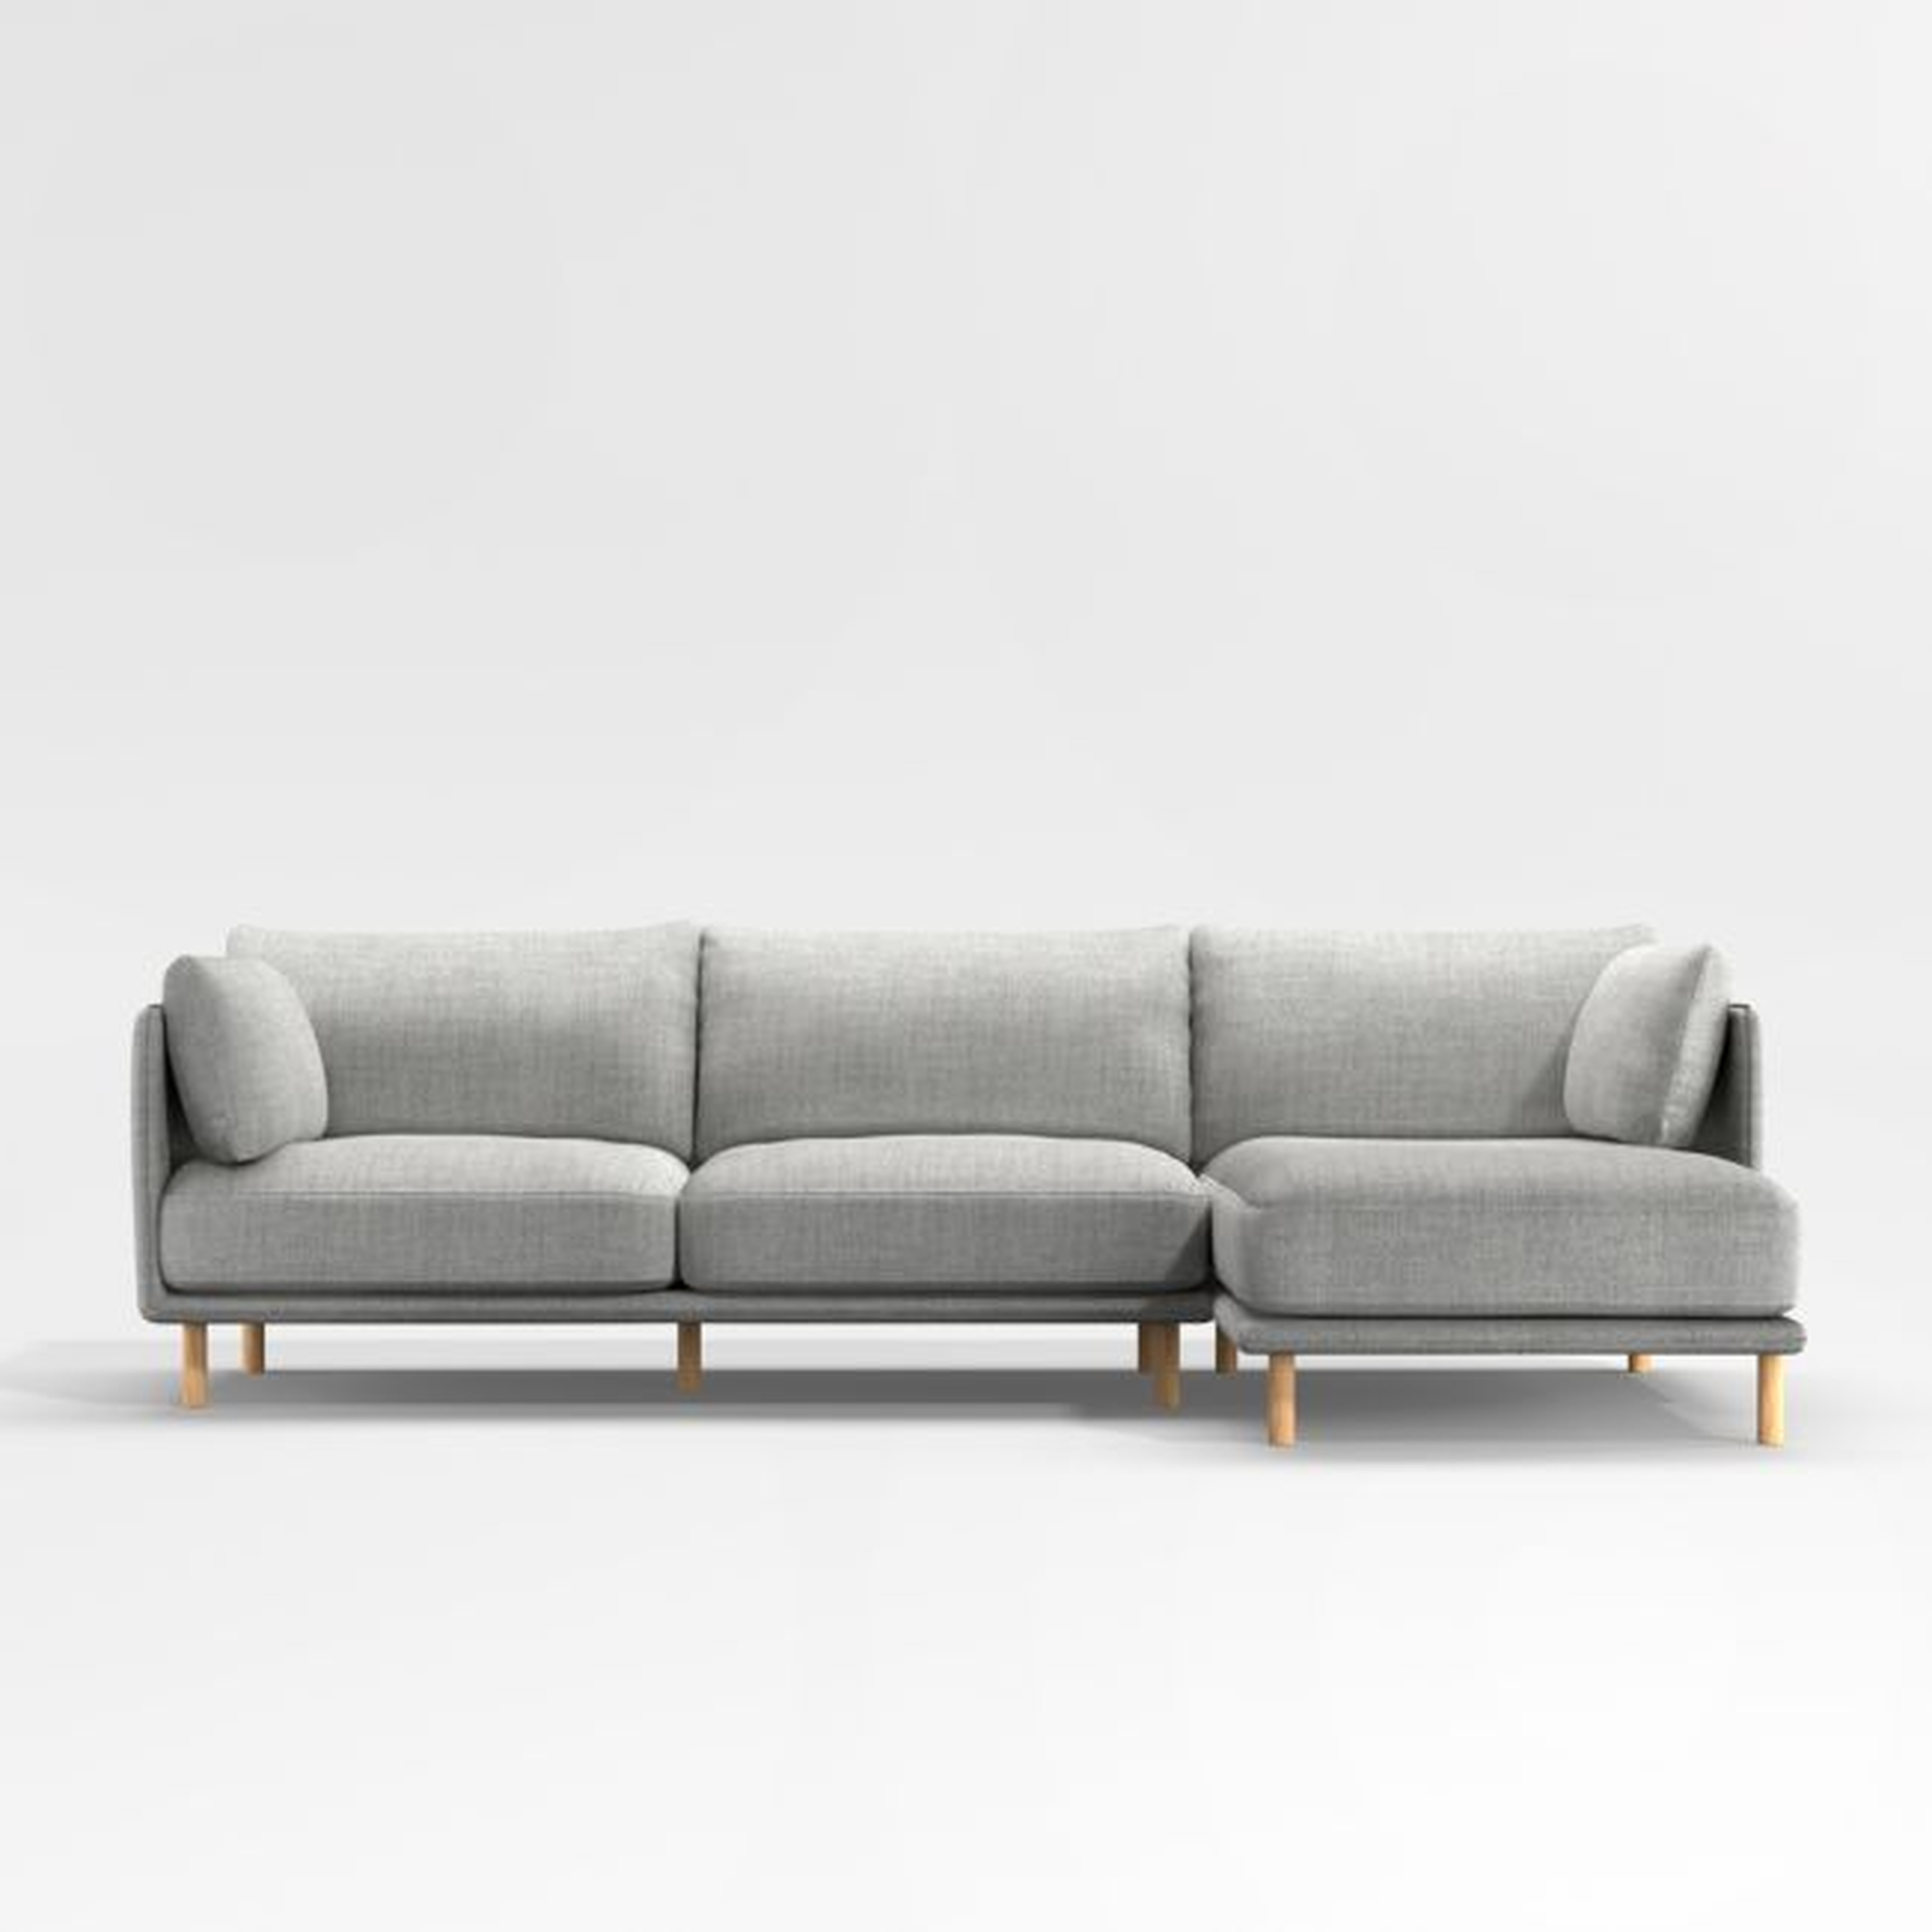 Wells 2-Piece Chaise Sectional Sofa with Natural Leg Finish - Crate and Barrel